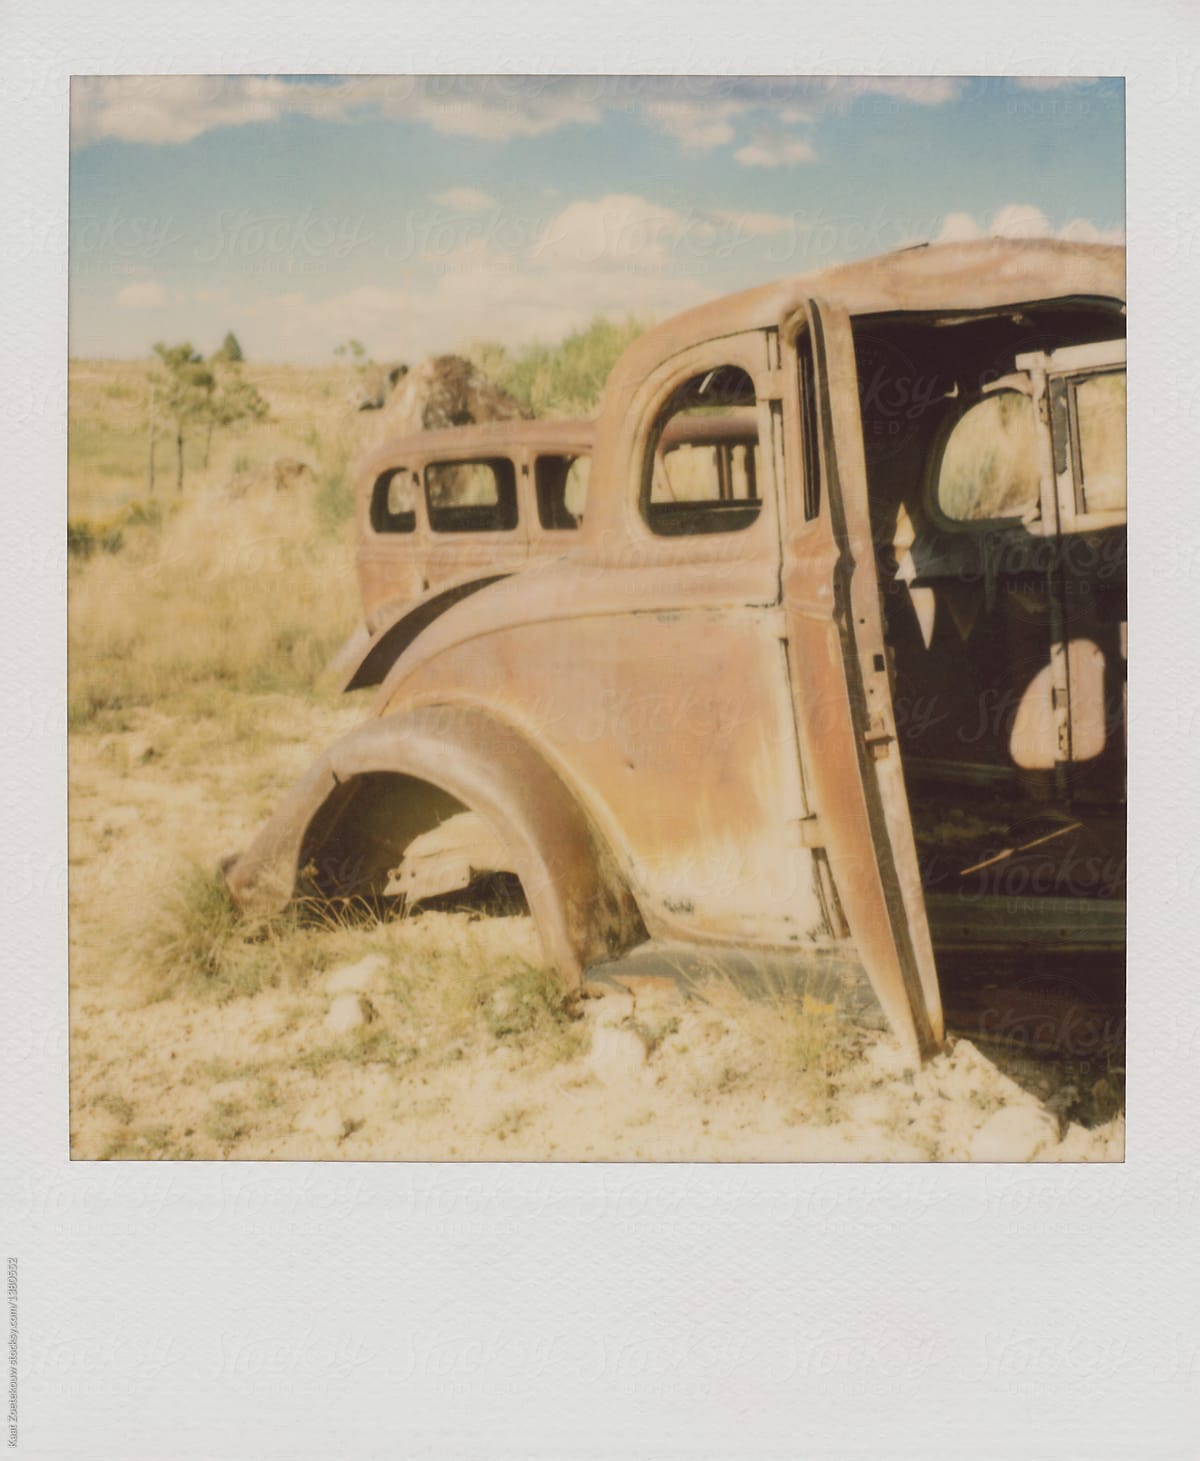 Polaroid image of old, rusted American cars